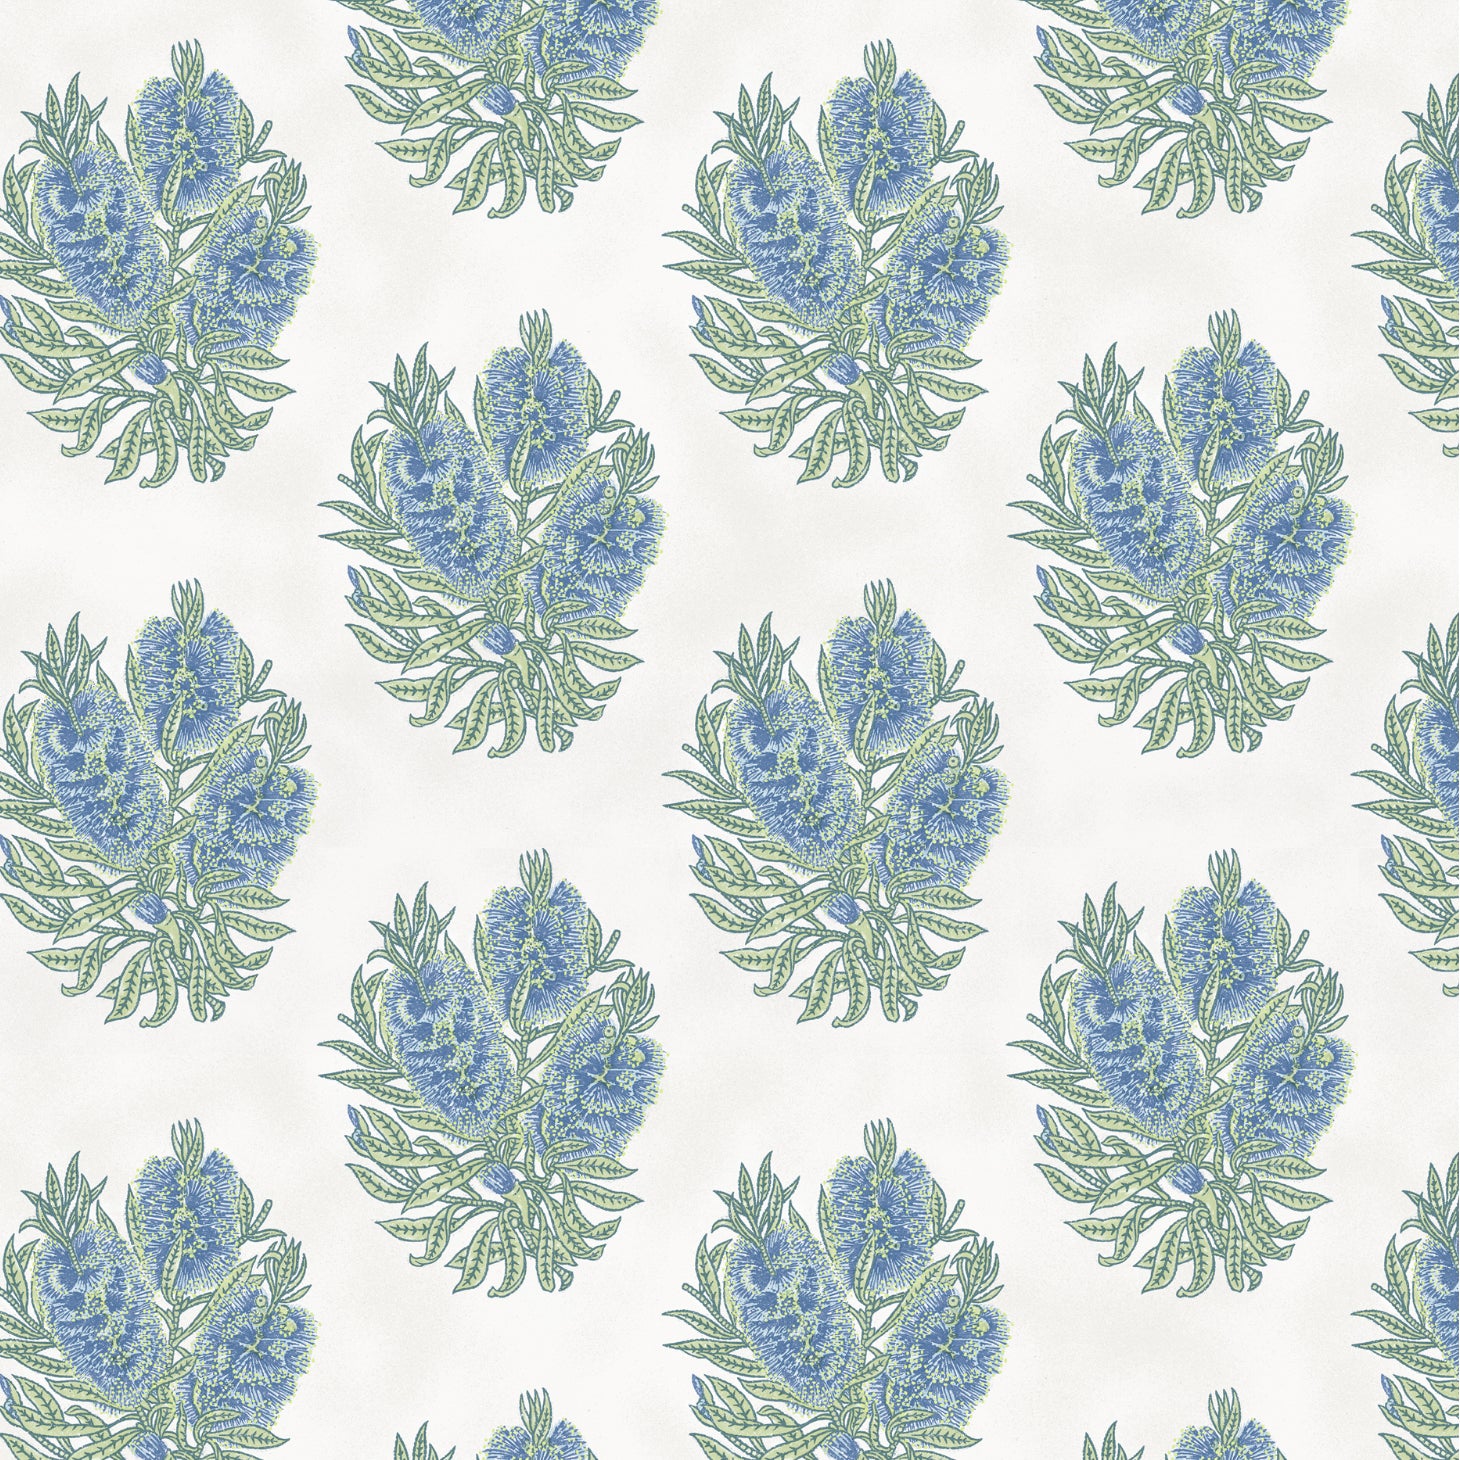 Detail of wallpaper in a floral cameo print in light blue and green on a white field.